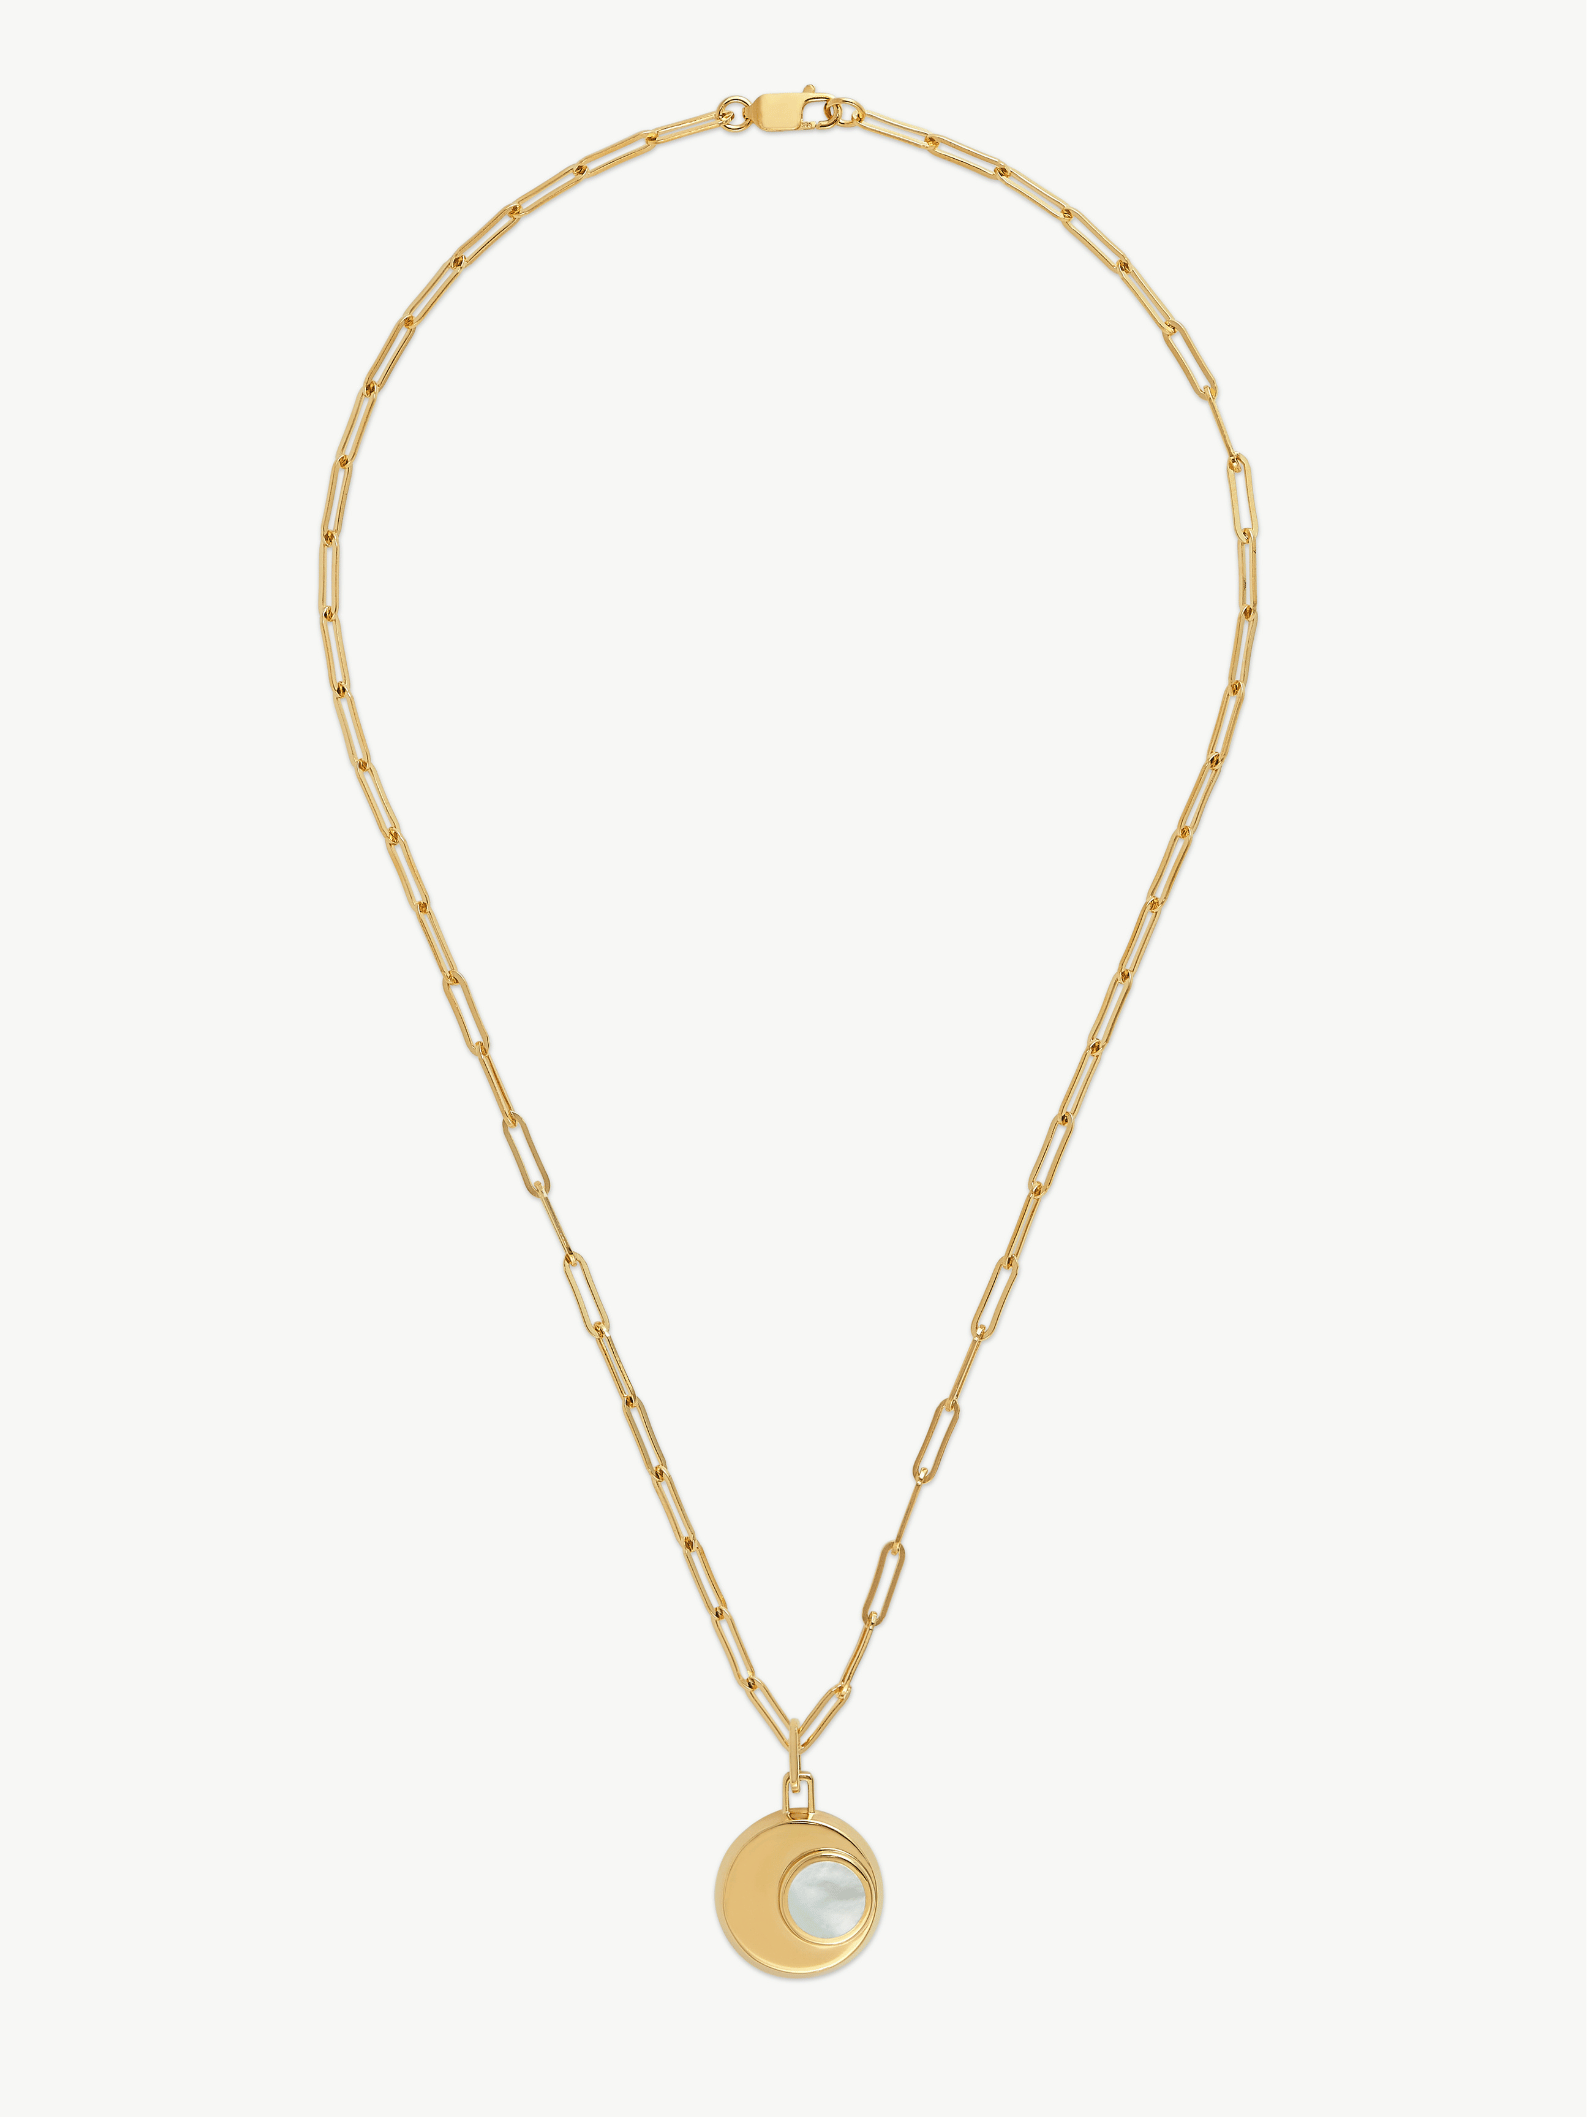 CRESSIDA NECKLACE <br> 18k Gold Plated - White Mother of Pearl